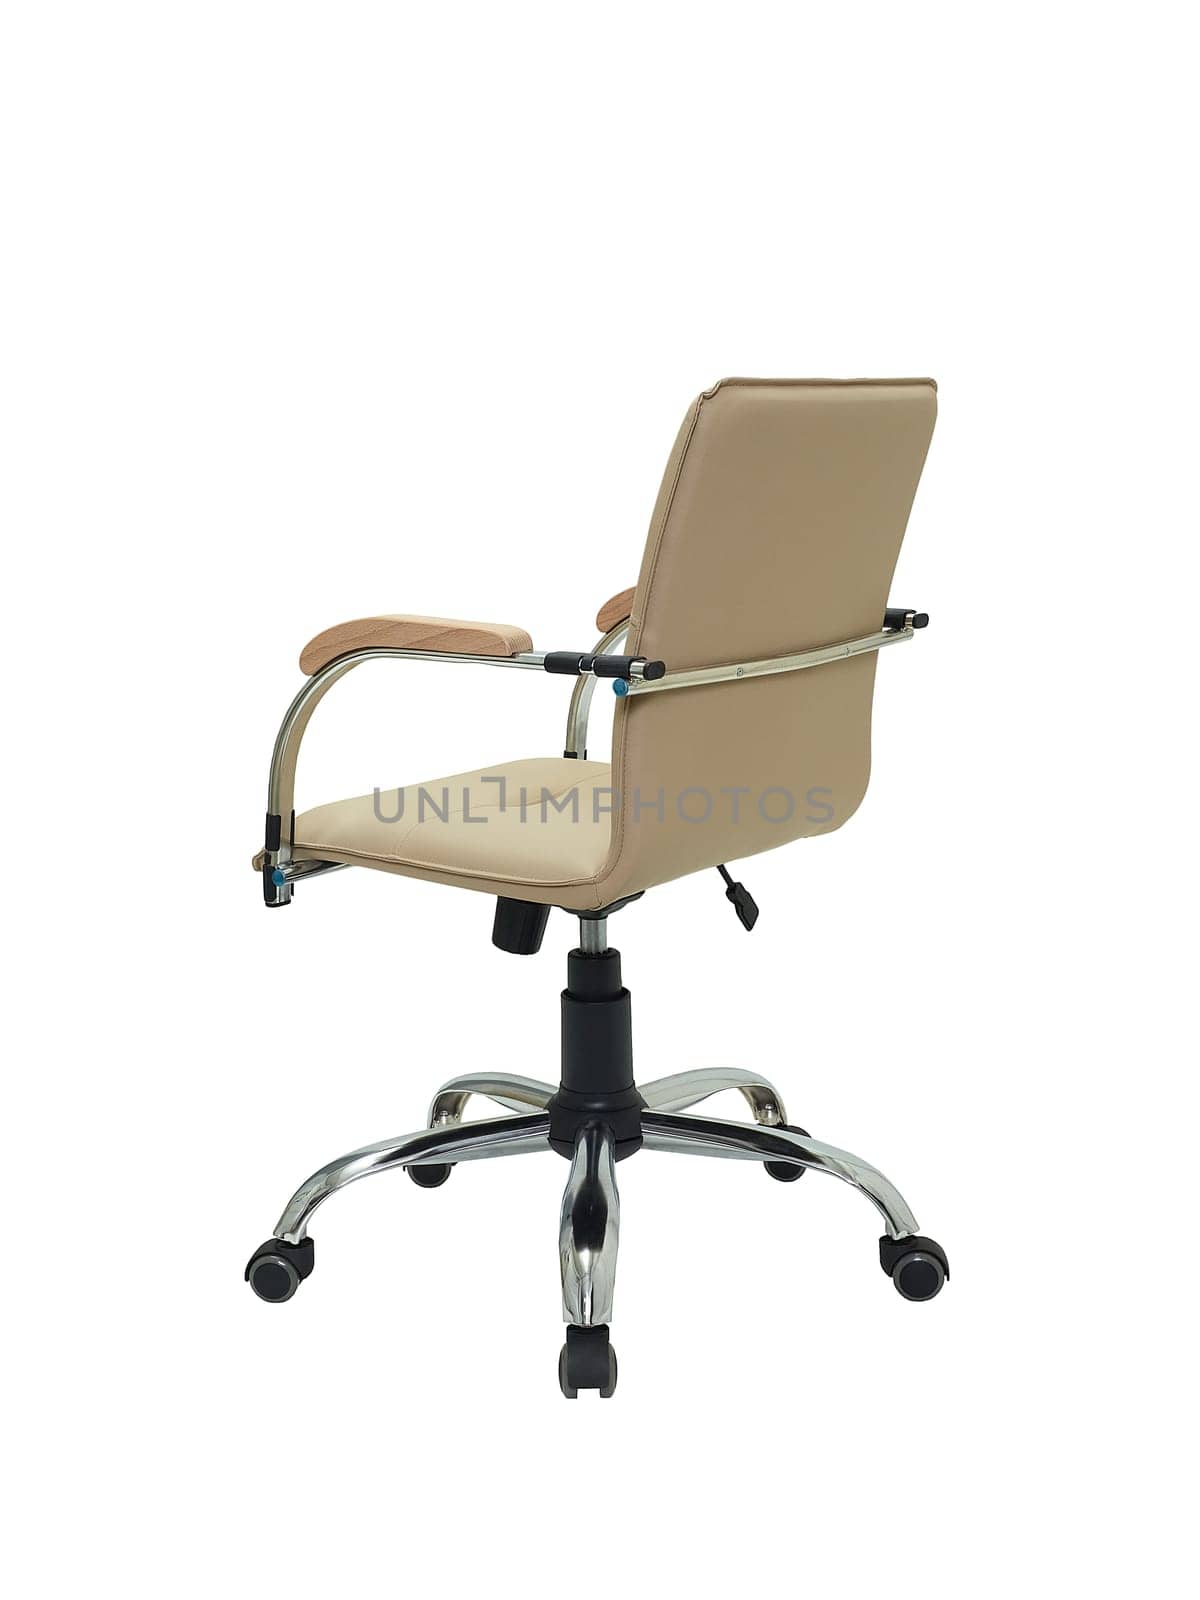 beige office armchair on wheels isolated on white background, back view. furniture in minimal style